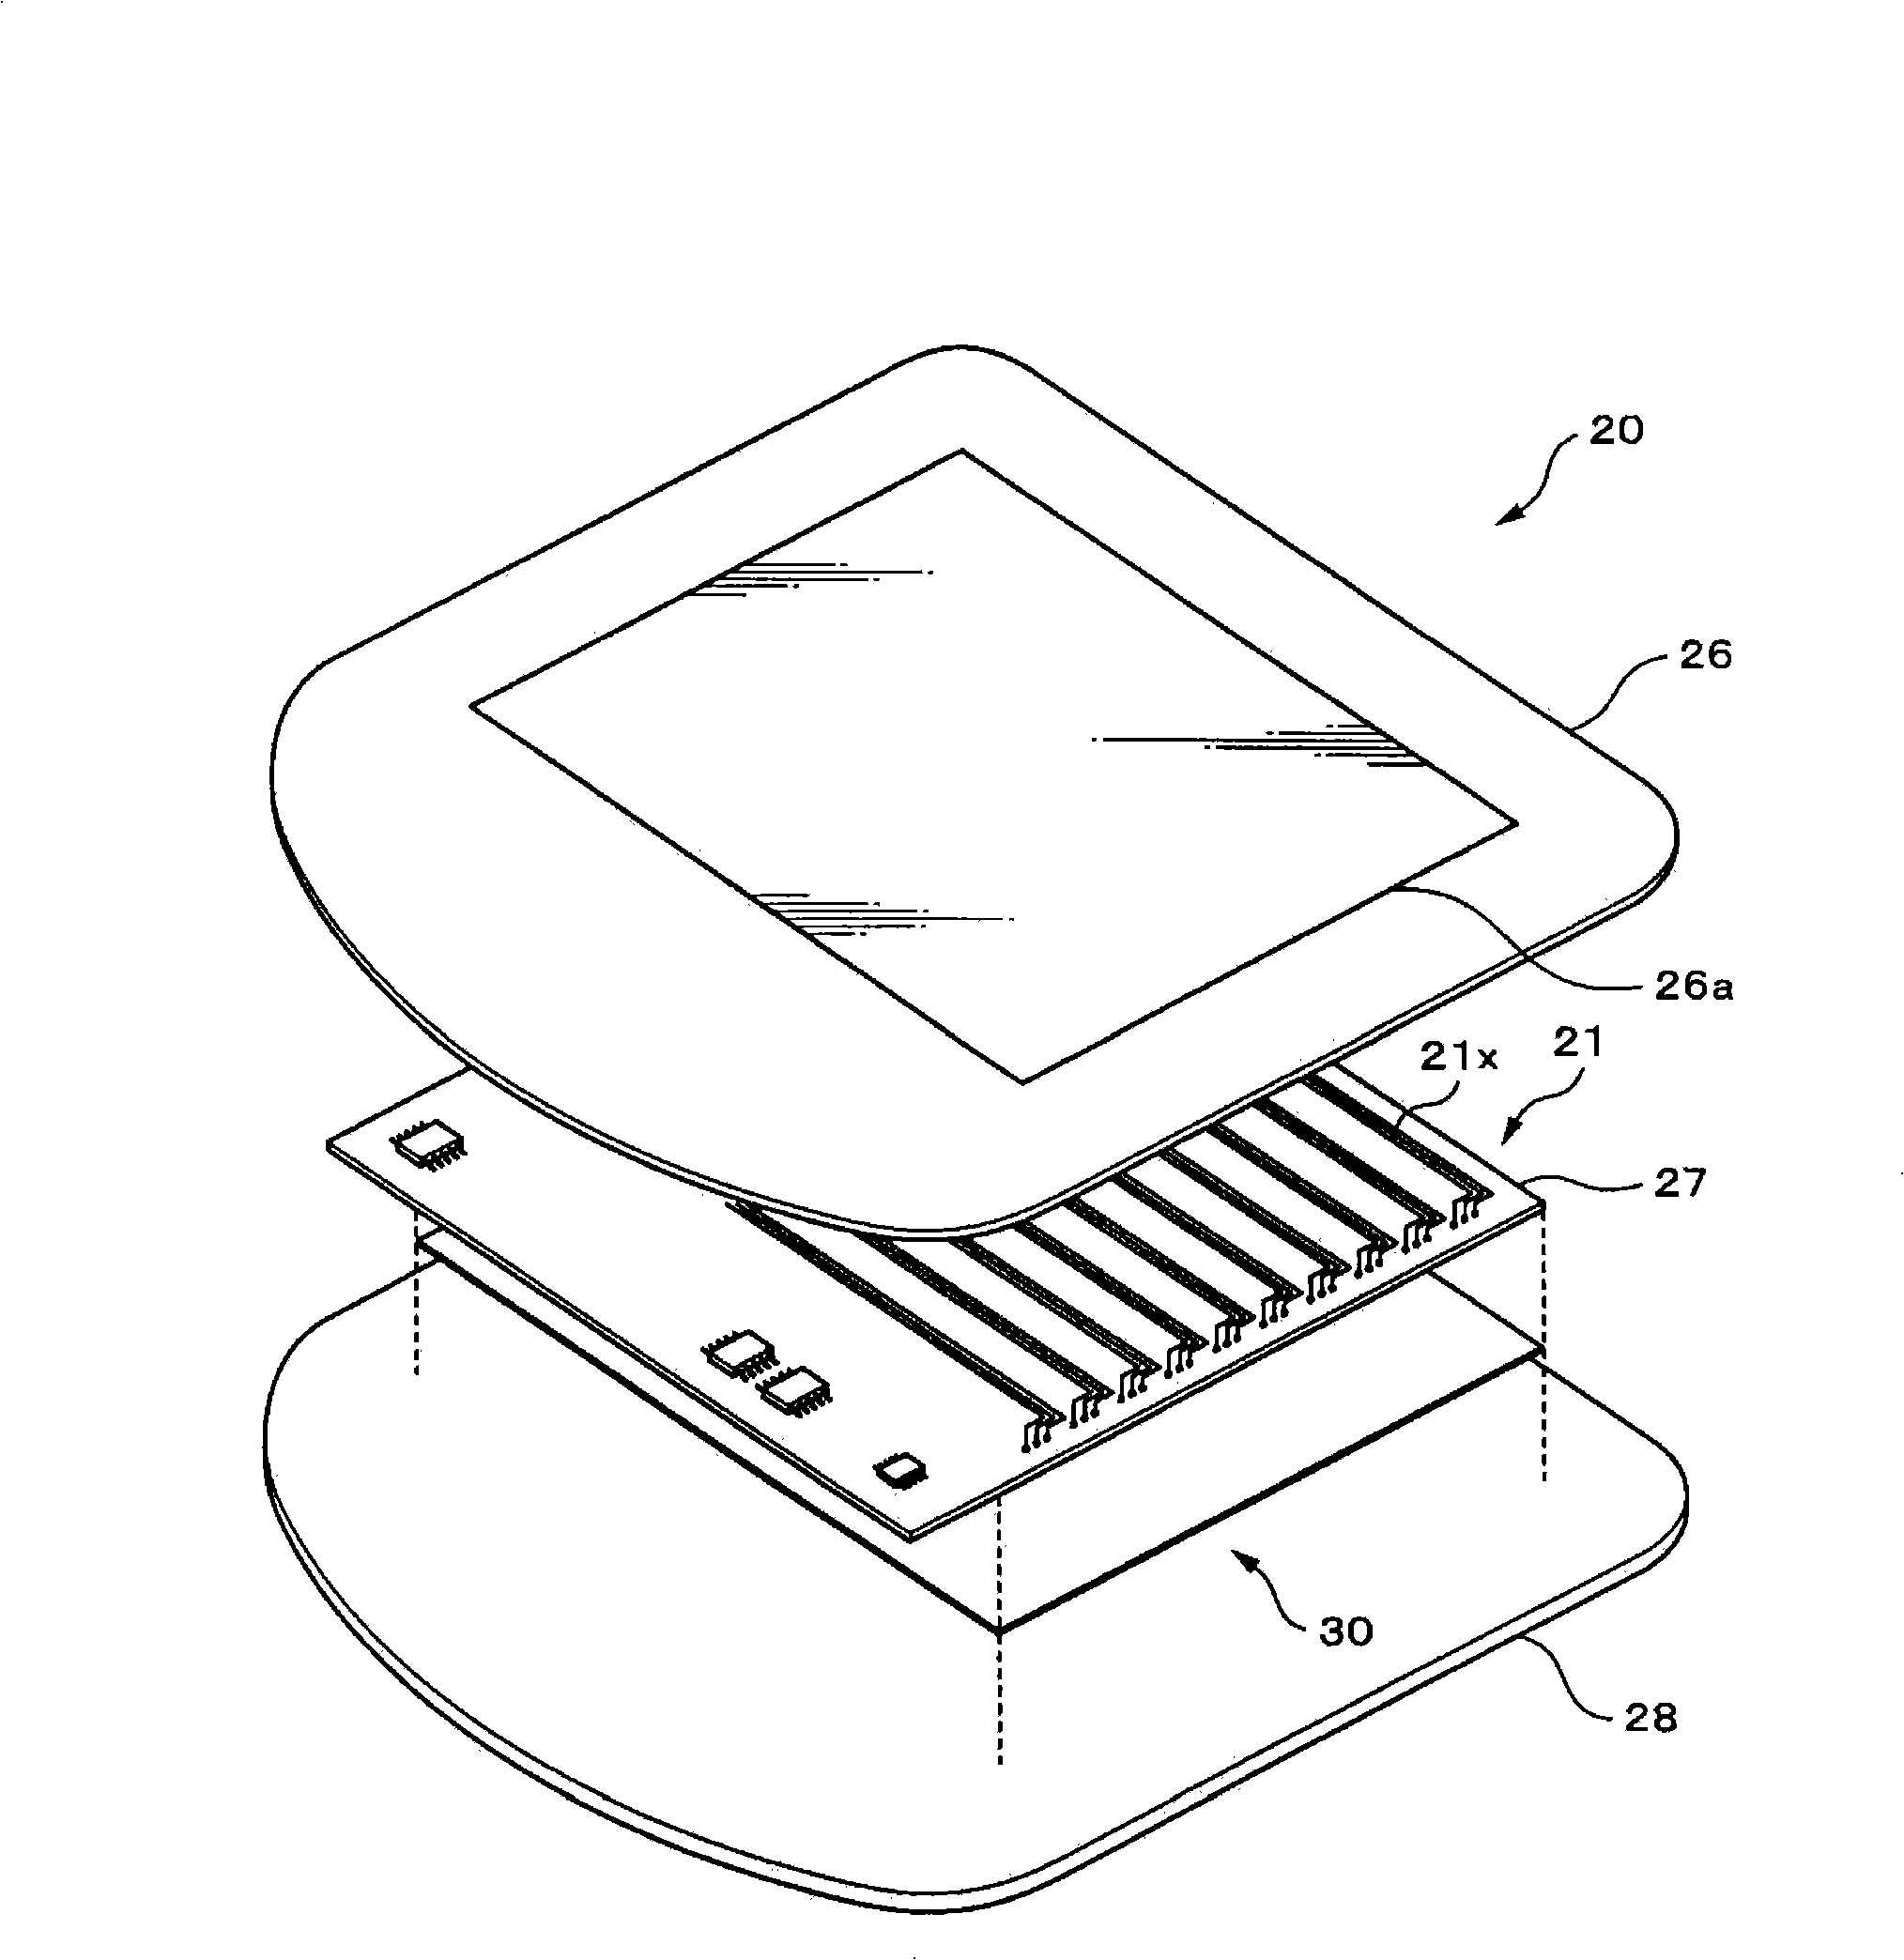 Position detector and display device